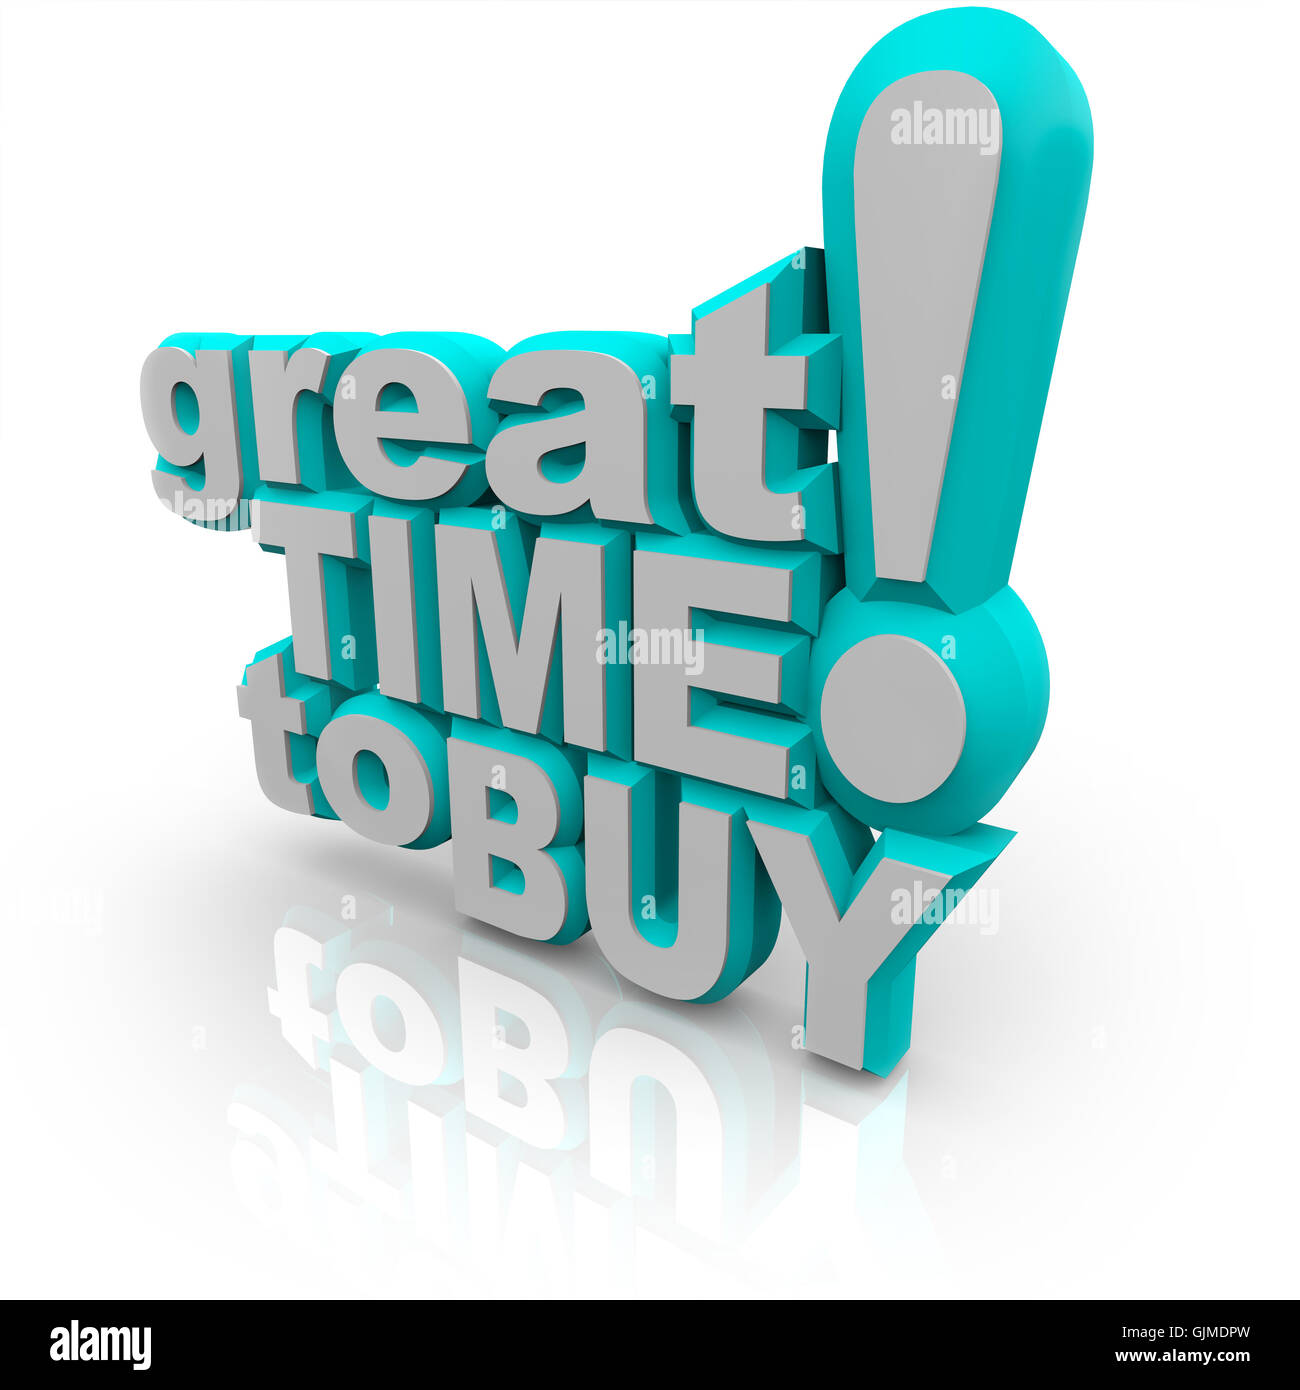 Great Time to Buy - Words Encouraging a Sale Stock Photo